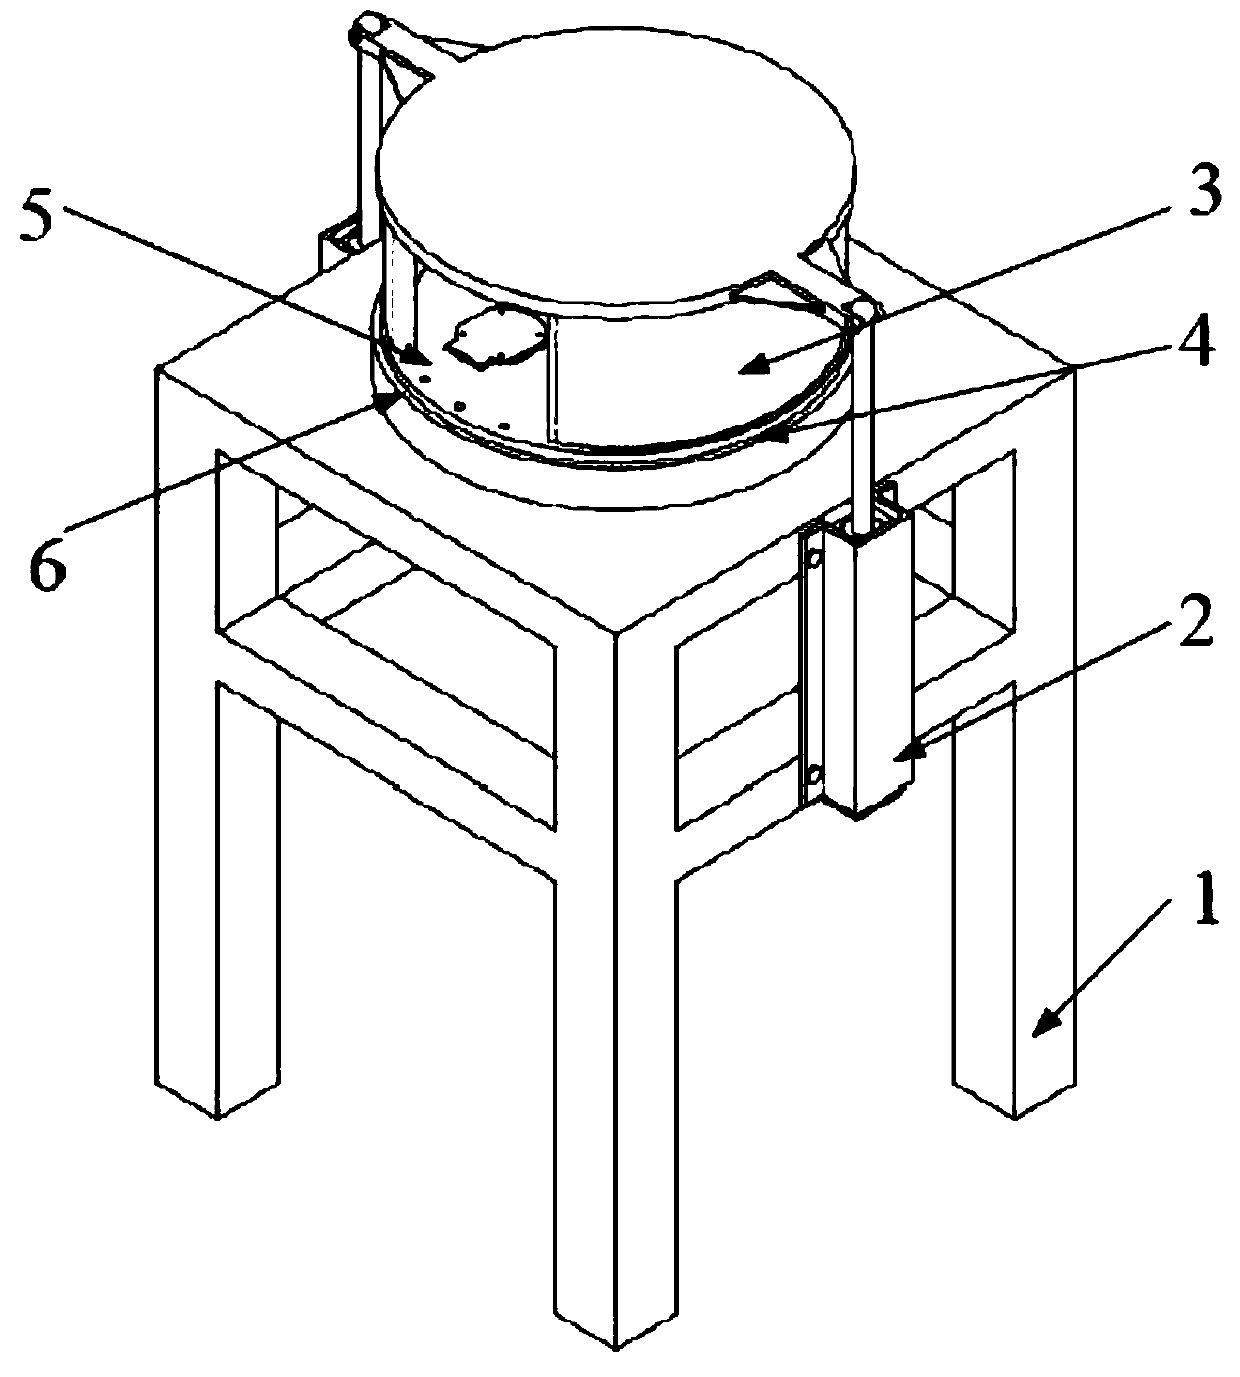 A manhole cover positive and negative pressure performance test bench and method